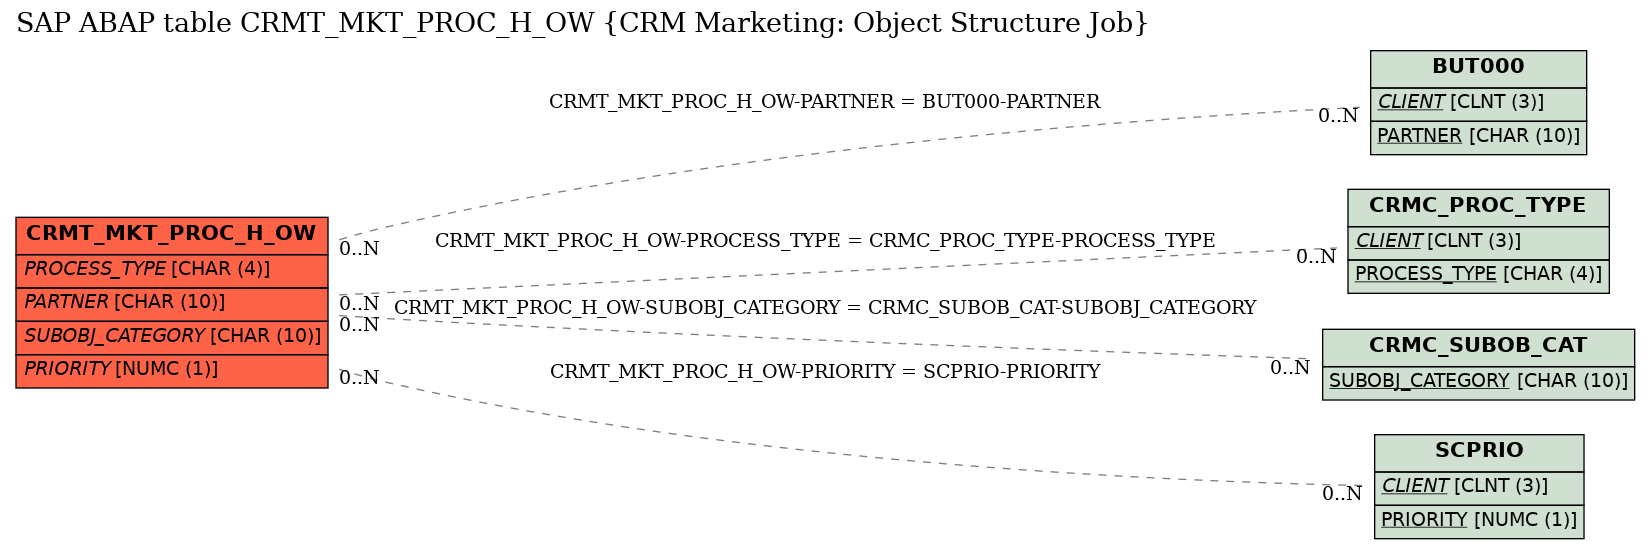 E-R Diagram for table CRMT_MKT_PROC_H_OW (CRM Marketing: Object Structure Job)